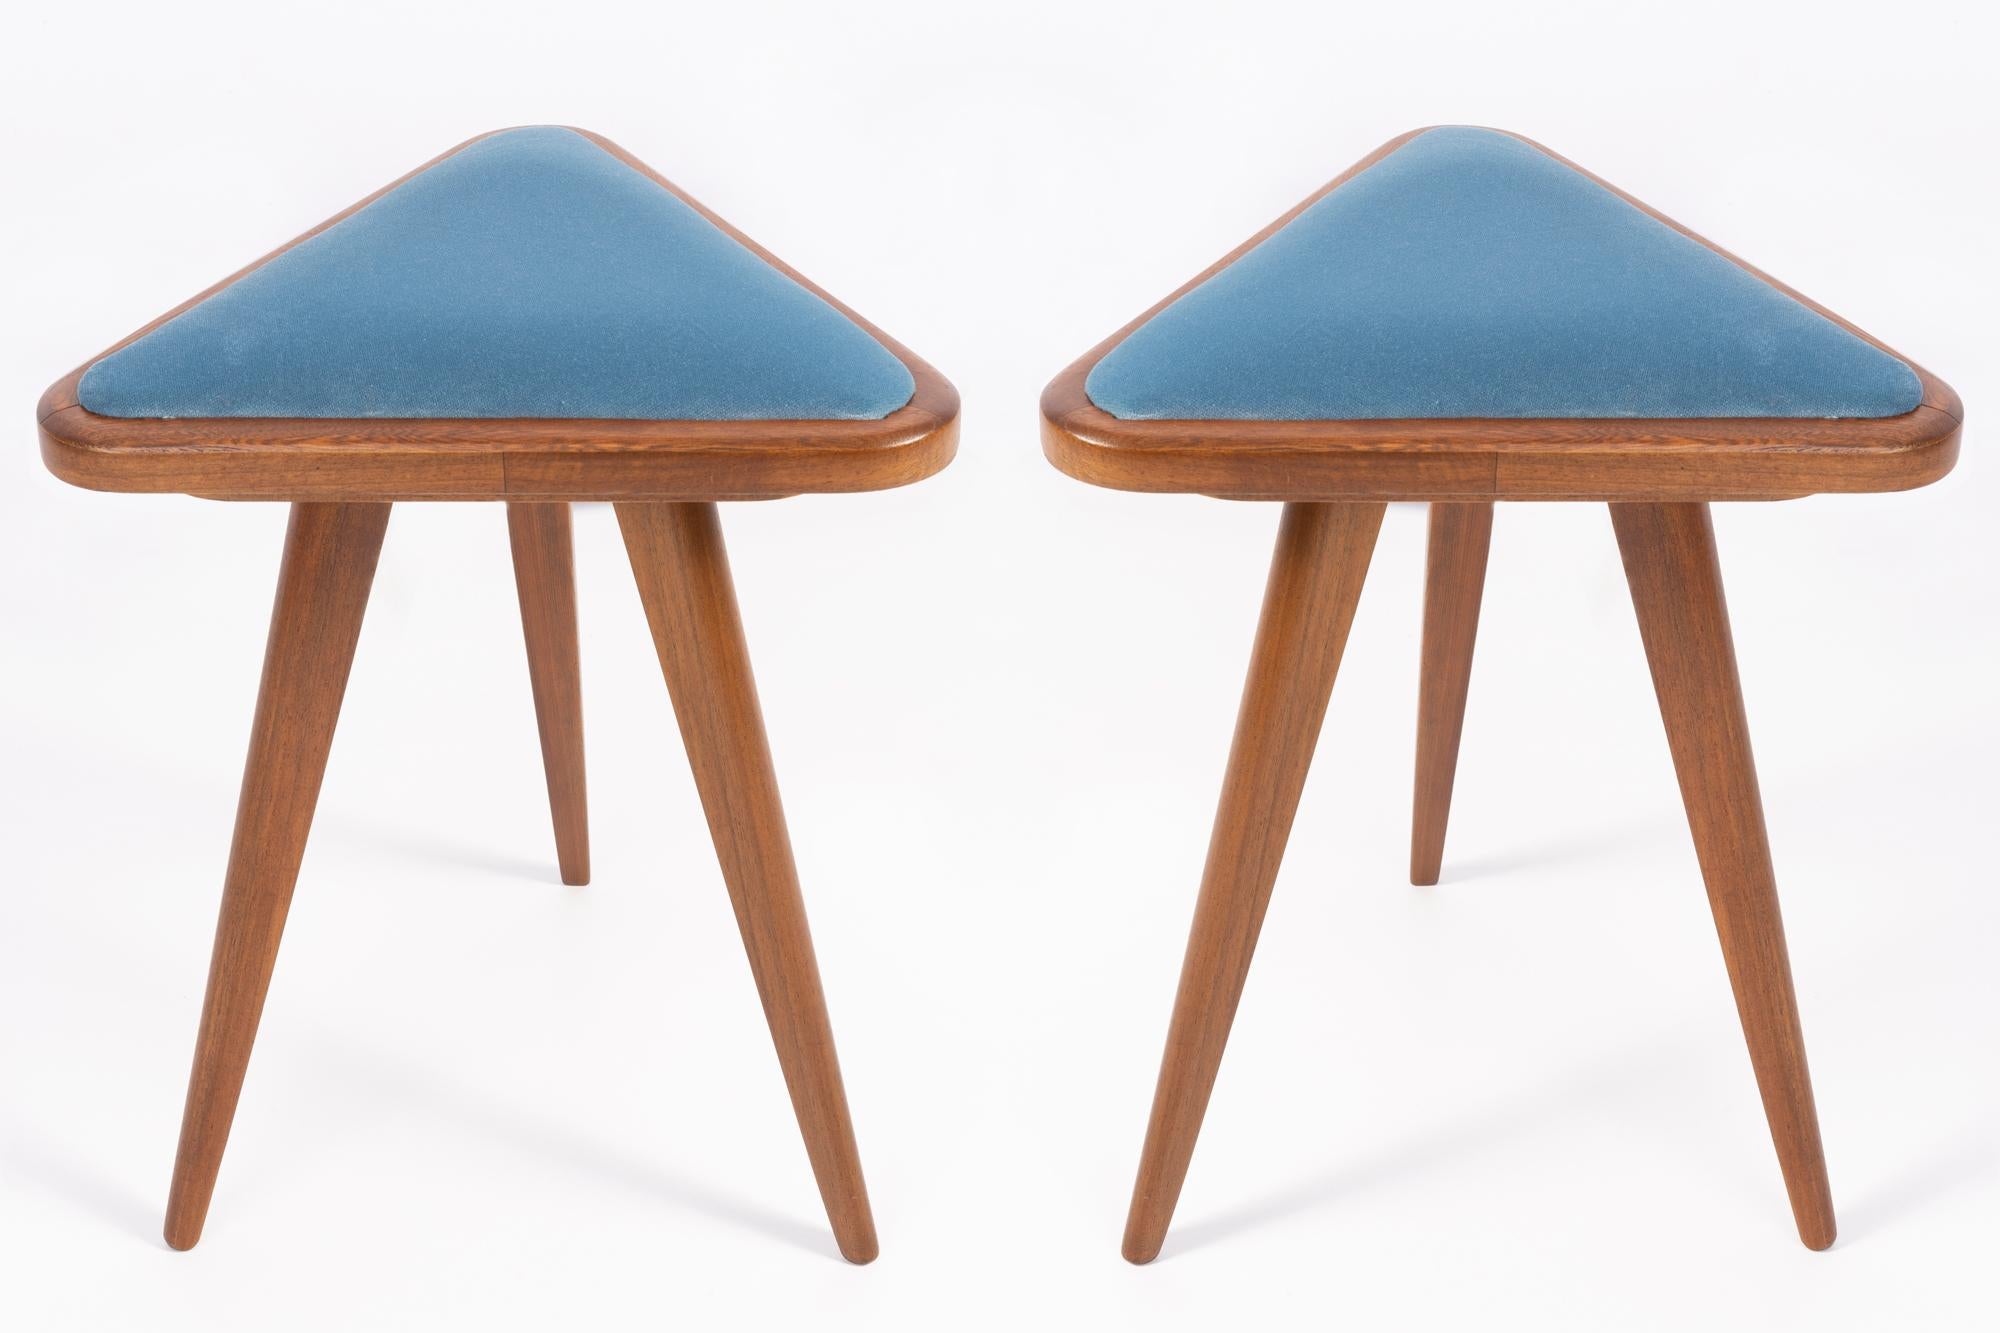 Stools from the turn of the 1960s and 1970s. Beautiful velour upholstery in blue color. The stools consists of an upholstered part, a seat and wooden legs narrowing downwards, characteristic of the 1960s style. They are absolutely unique.

Any